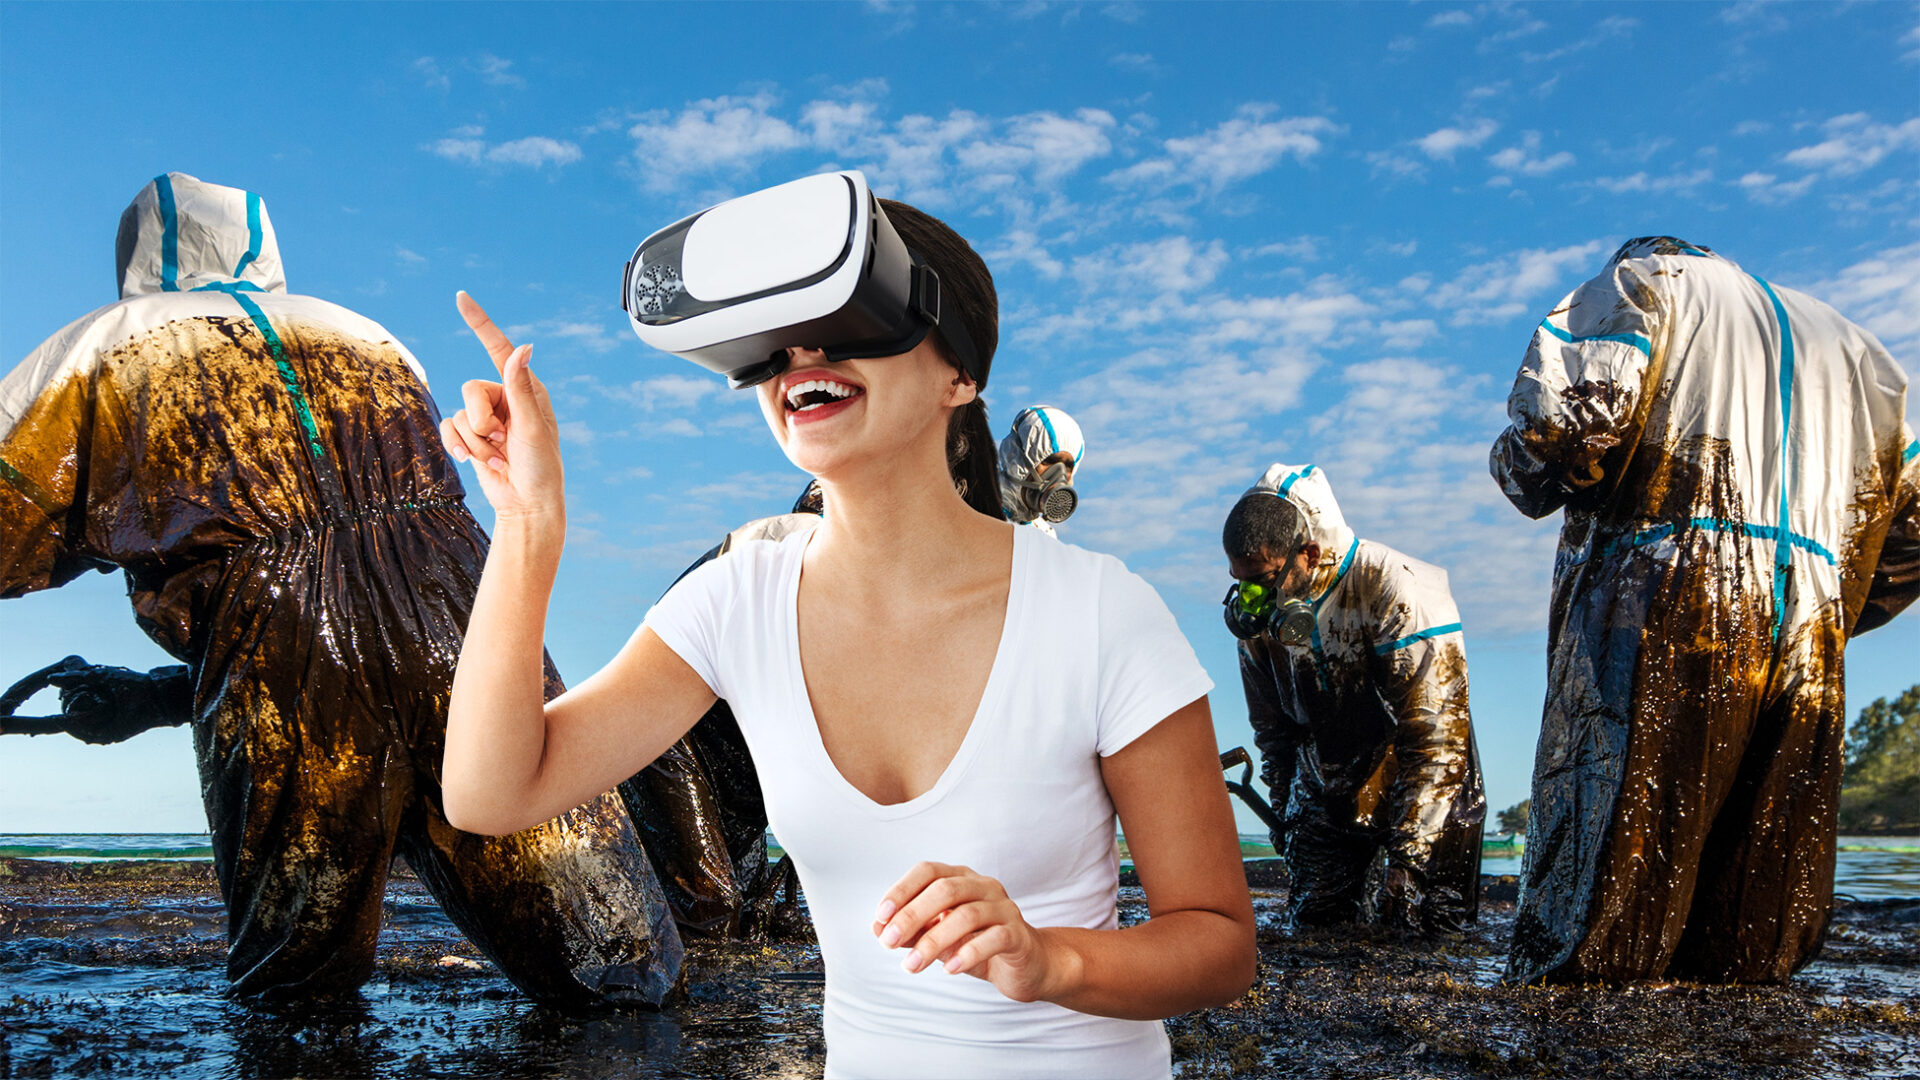 Photo collage showing an excited young woman who is blind because she wears massive "augmented-reality" glasses; in the background is a team of people wearing gas masks and protective clothing while they clean up a beach from an oil spill.